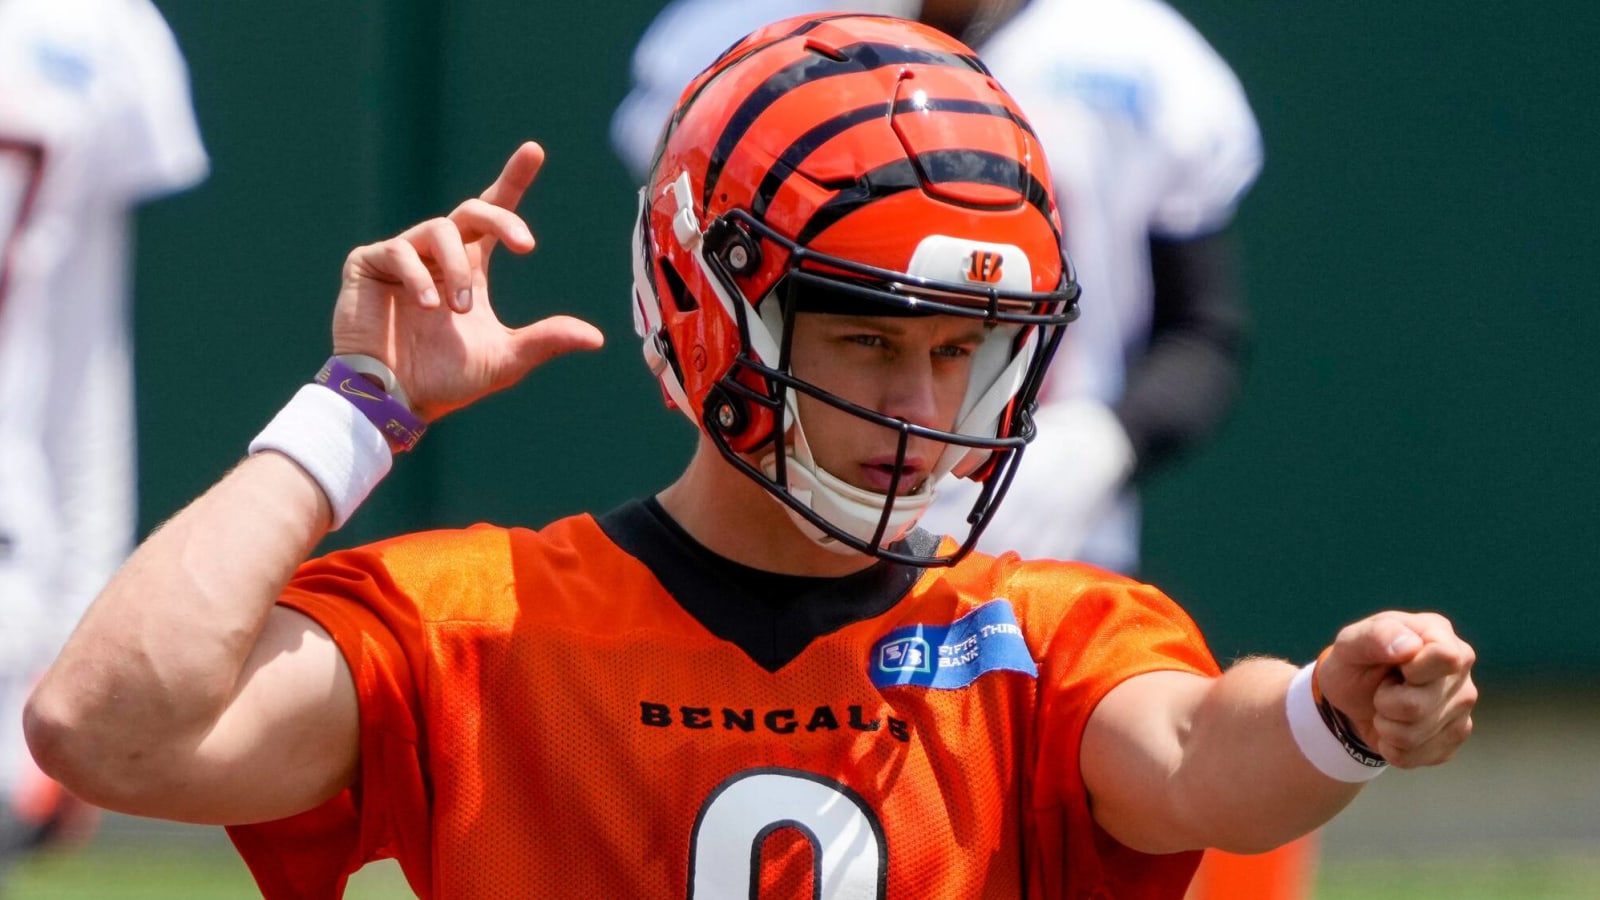 NFL futures, 2 Cincinnati Bengals bets: Can Burrow lead Cincy back to the AFC title game?